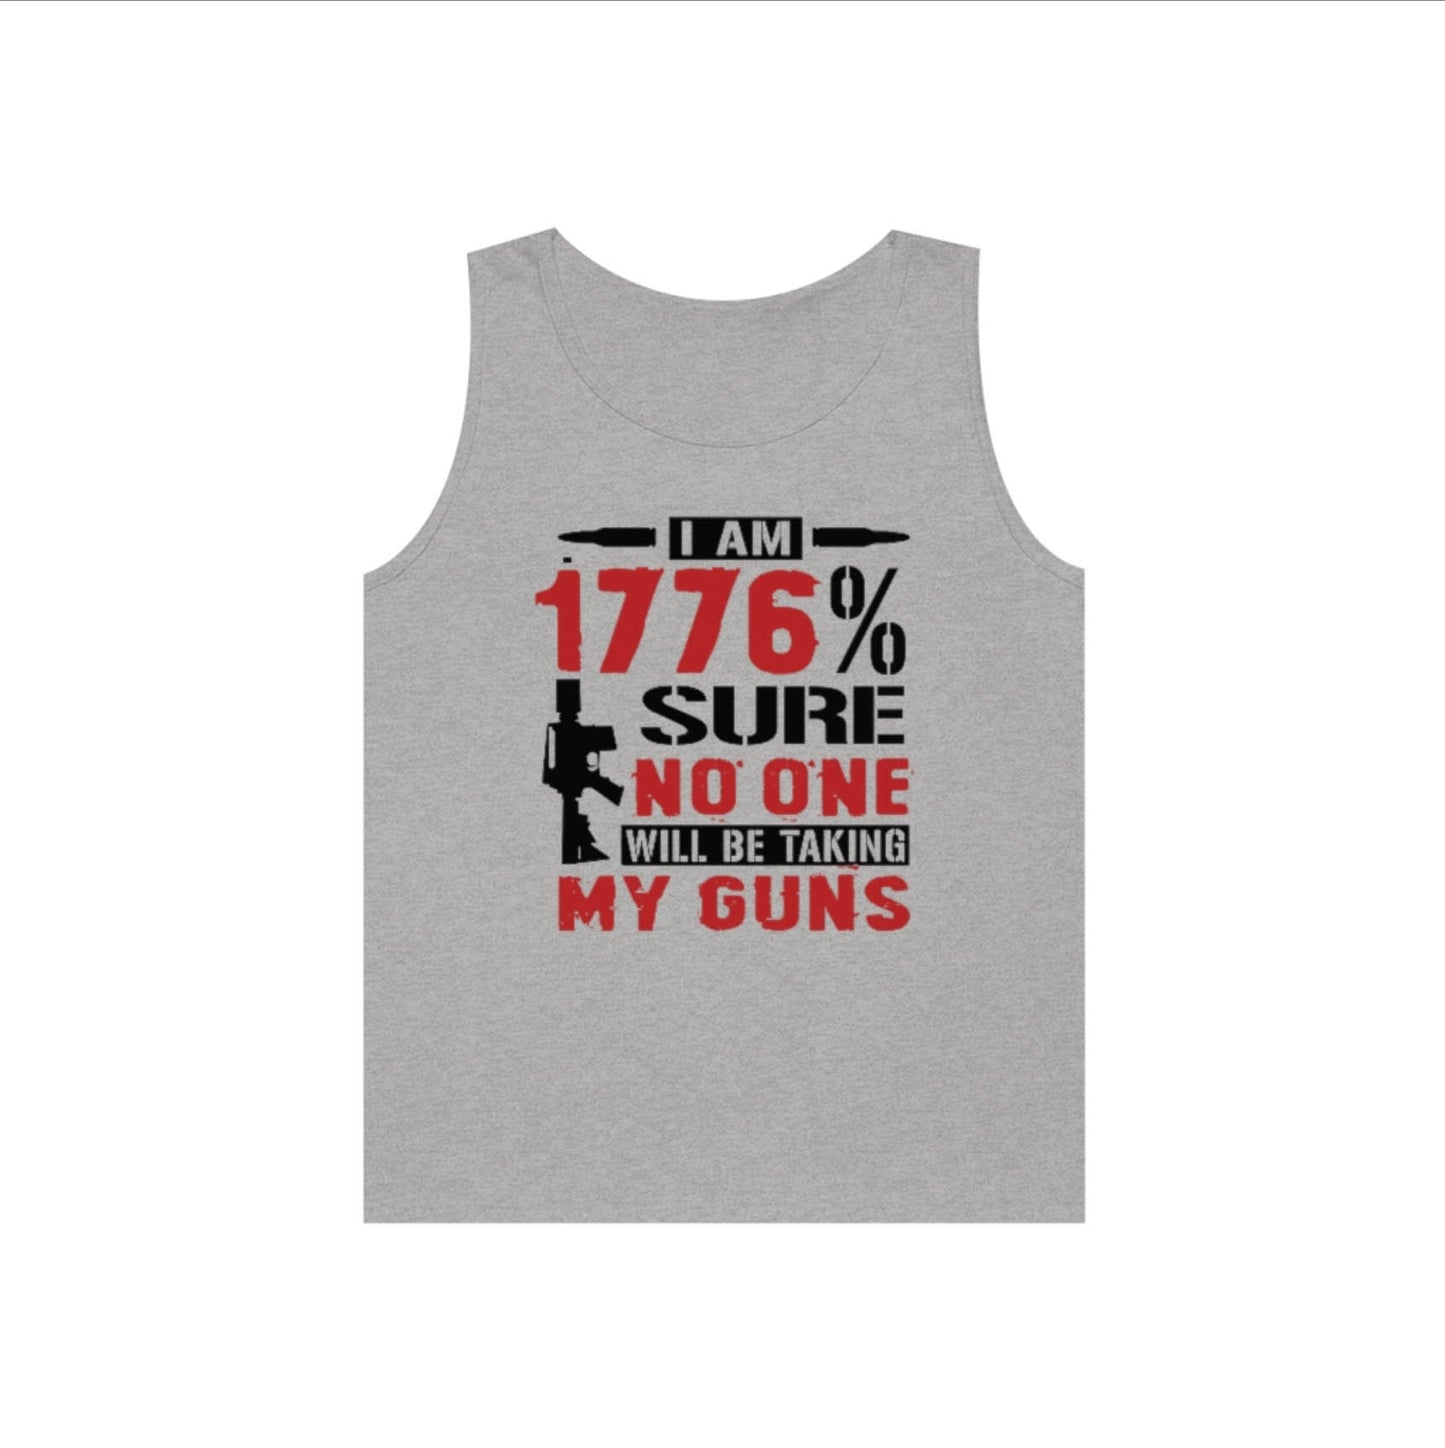 I Am 1776% Sure | Men's Heavy Cotton Tank Top - Rise of The New Media